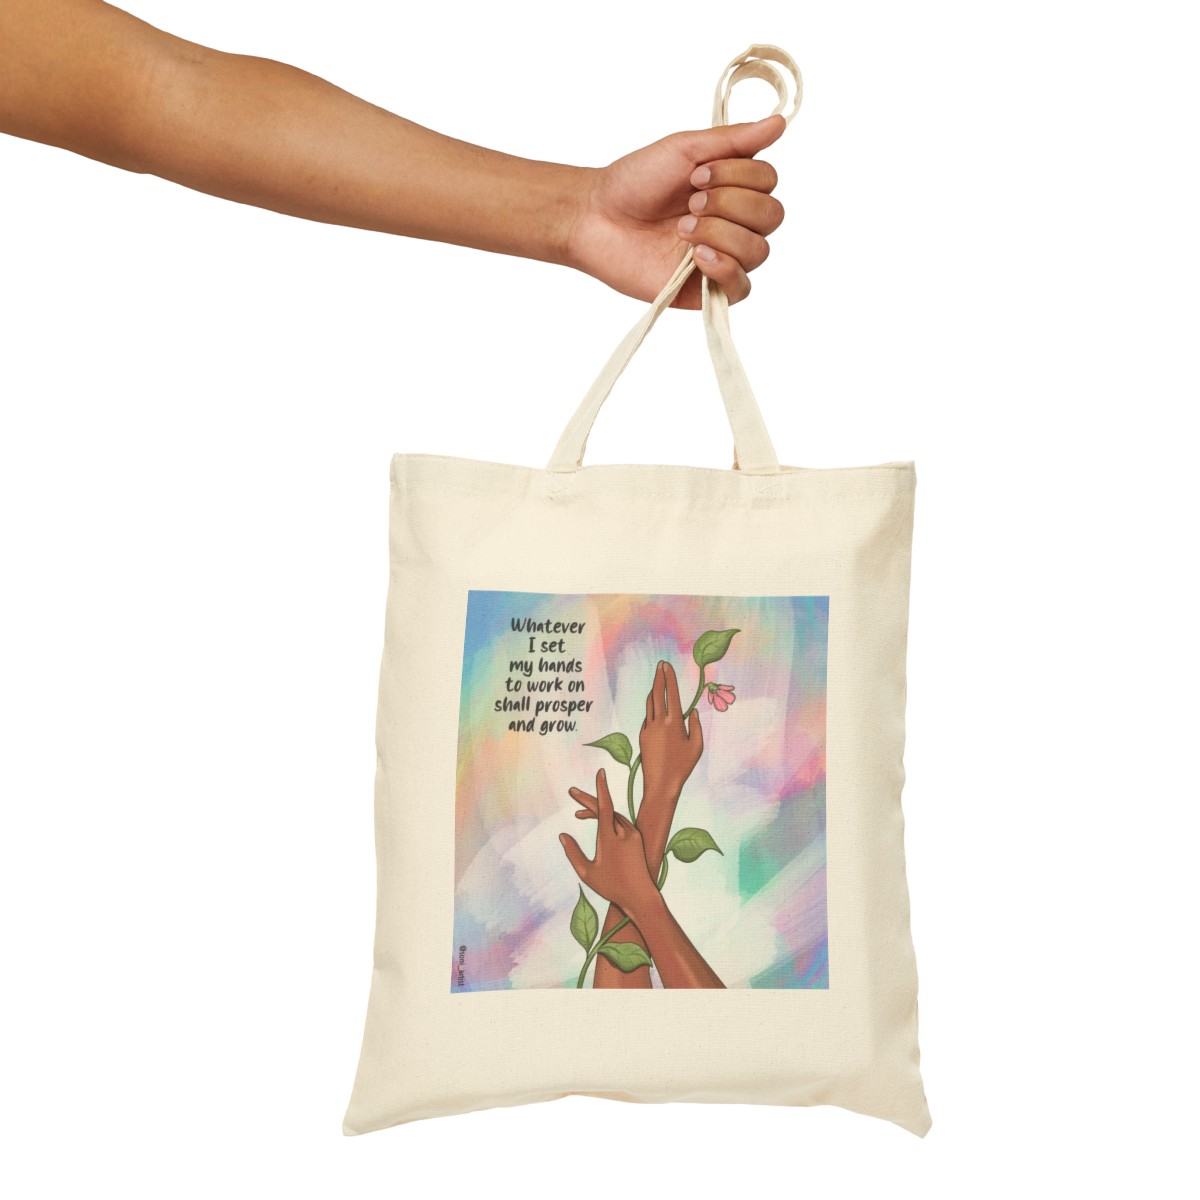 "Whatever I set my hands to" Cotton Canvas Tote Bag product thumbnail image